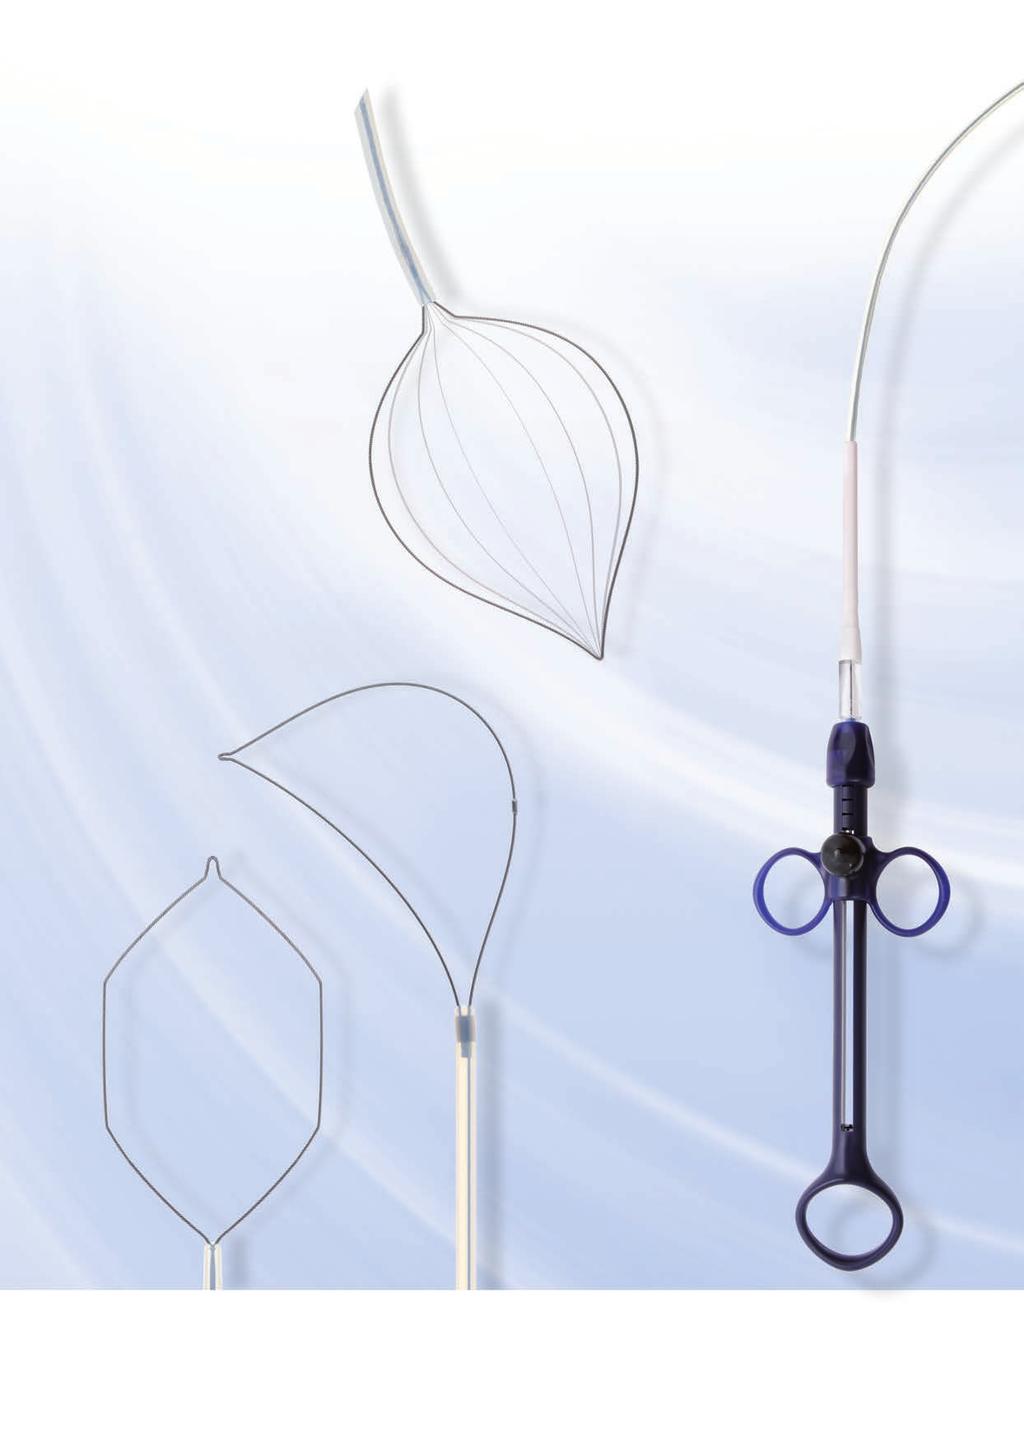 RotaSnare Polypectomy Snares Single Use RotaSnare 360 Rotating Versions Easier Polyp Snaring Multifilament Loop Versions Safe